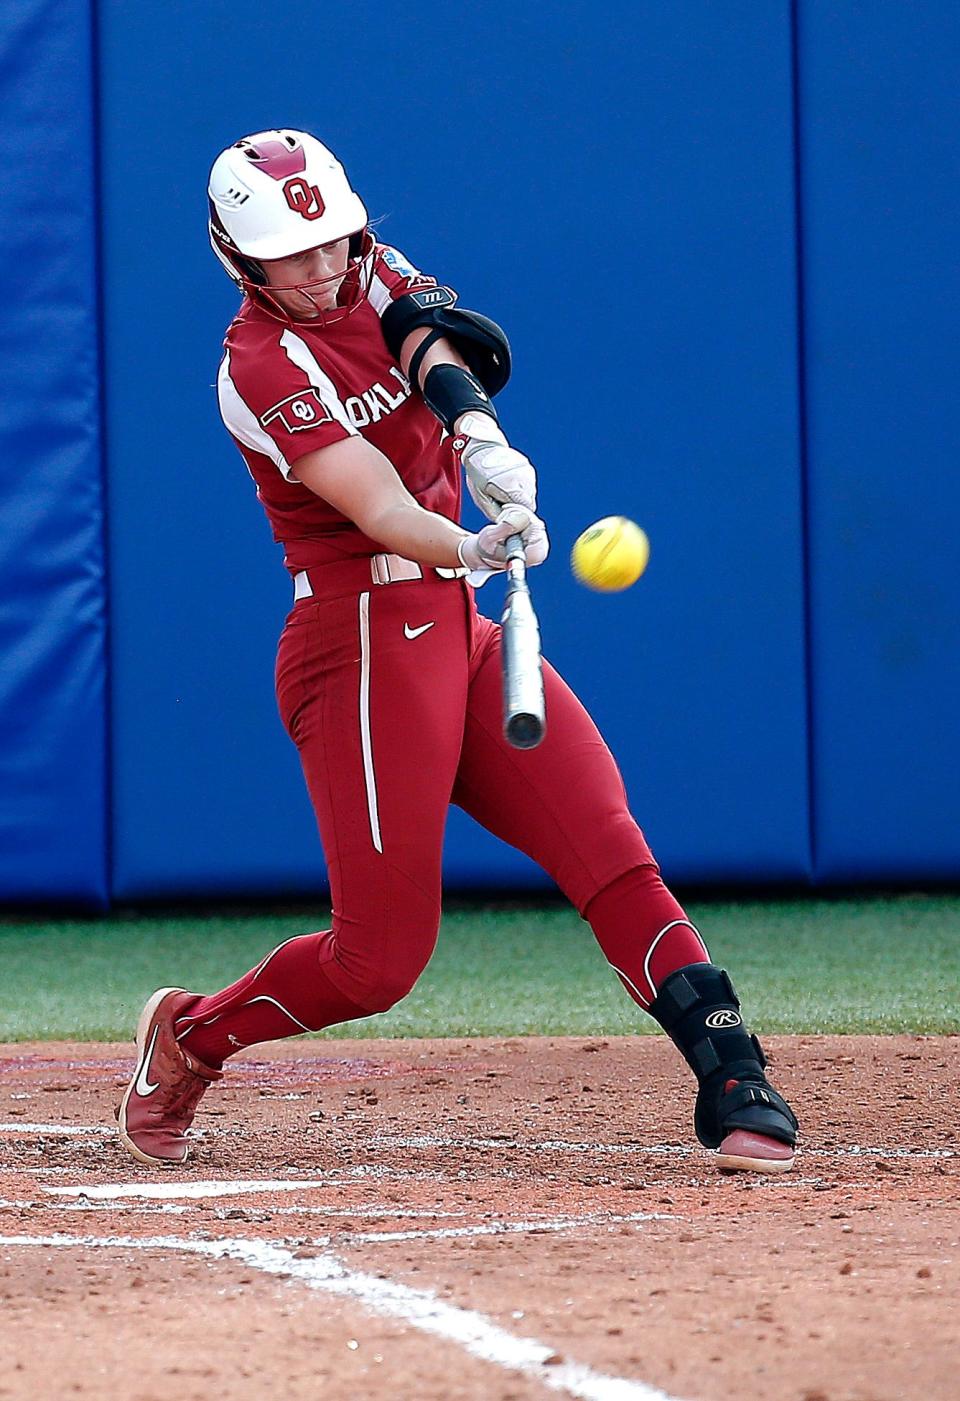 Oklahoma's Jana Johns (20) hits a home run in the third inning during the second game of Women's College World Series championship series between University of Oklahoma (OU) and Florida State University at the USA Softball Hall of Fame Stadium in Oklahoma City, Wednesday, June 9, 2021. Oklahoma won 6-2.